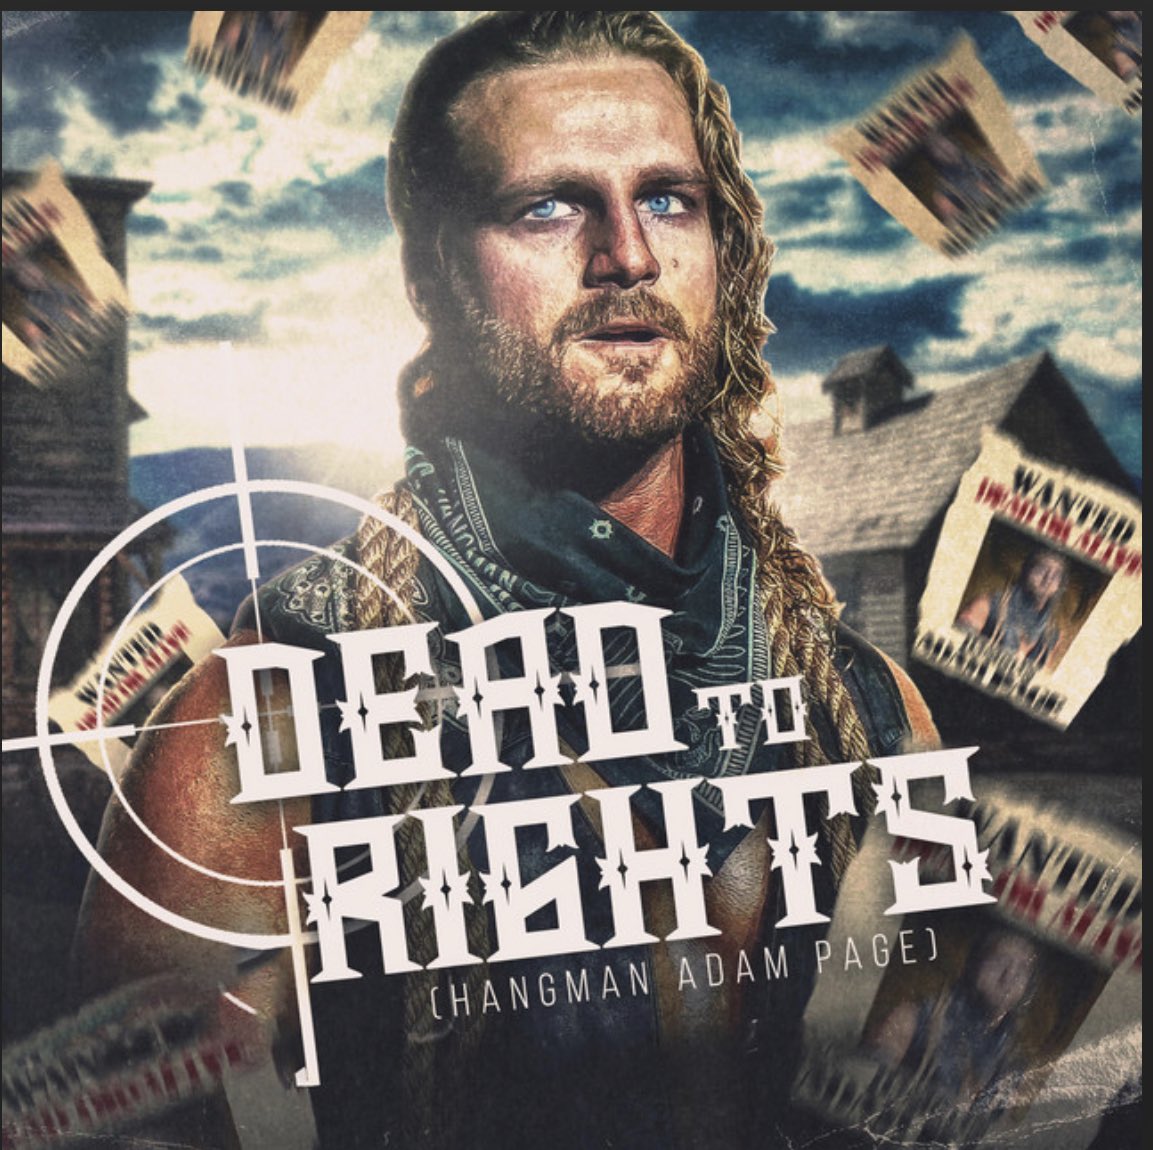 I’m a shotgun blast, kick in the ass
Heavy metal meets Johnny Cash
Wanted alive or dead….

“Dead To Rights” (Hangman Adam Page) is available now on Spotify!

open.spotify.com/track/7nL597A7…

#THESEWOLVES #HangmanPage #AdamPage #Wrestlingtheme #prowrestling